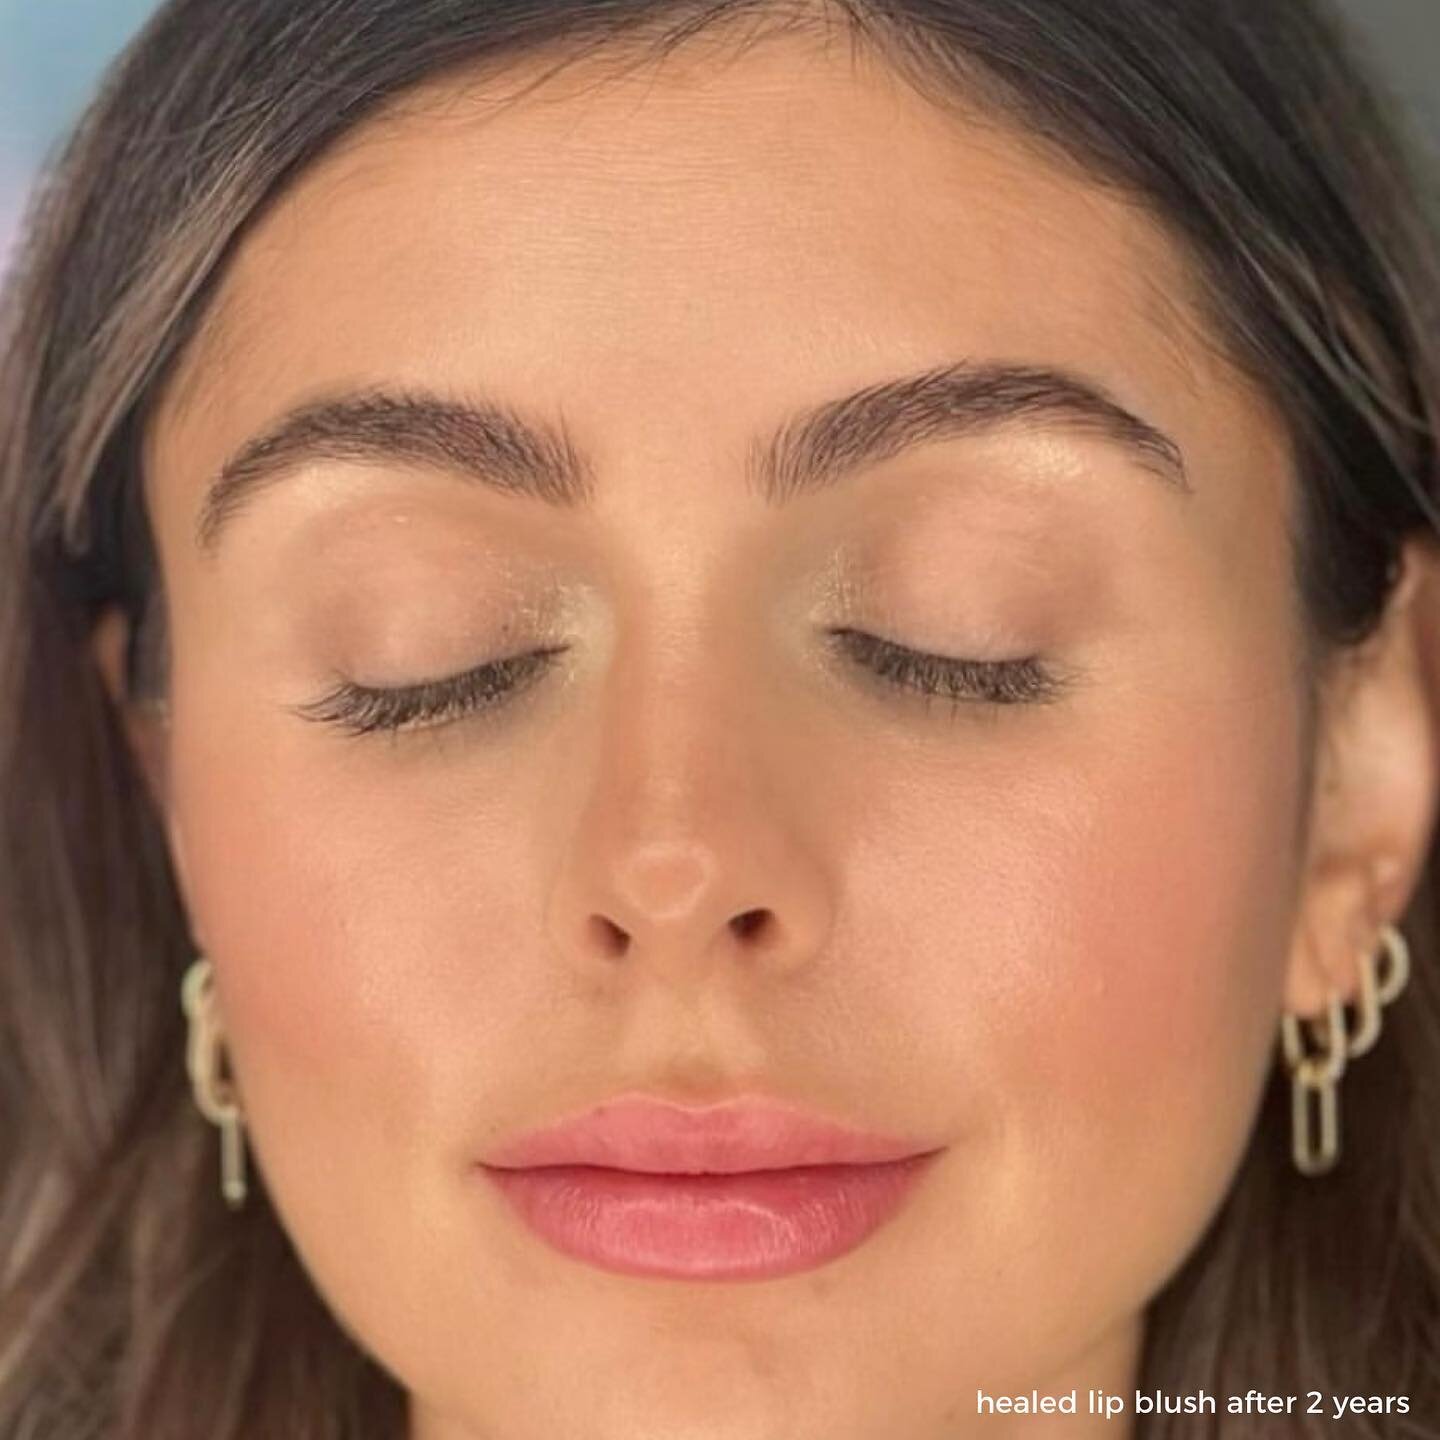 2 year old healed lip blush &mdash; still PERFECT ❣️

With proper aftercare followed, protecting your lips from the sun you can get the most out of your lip blush. 

Lip blush is meant to last about 3 years, and I usually recommend touch ups every 1-